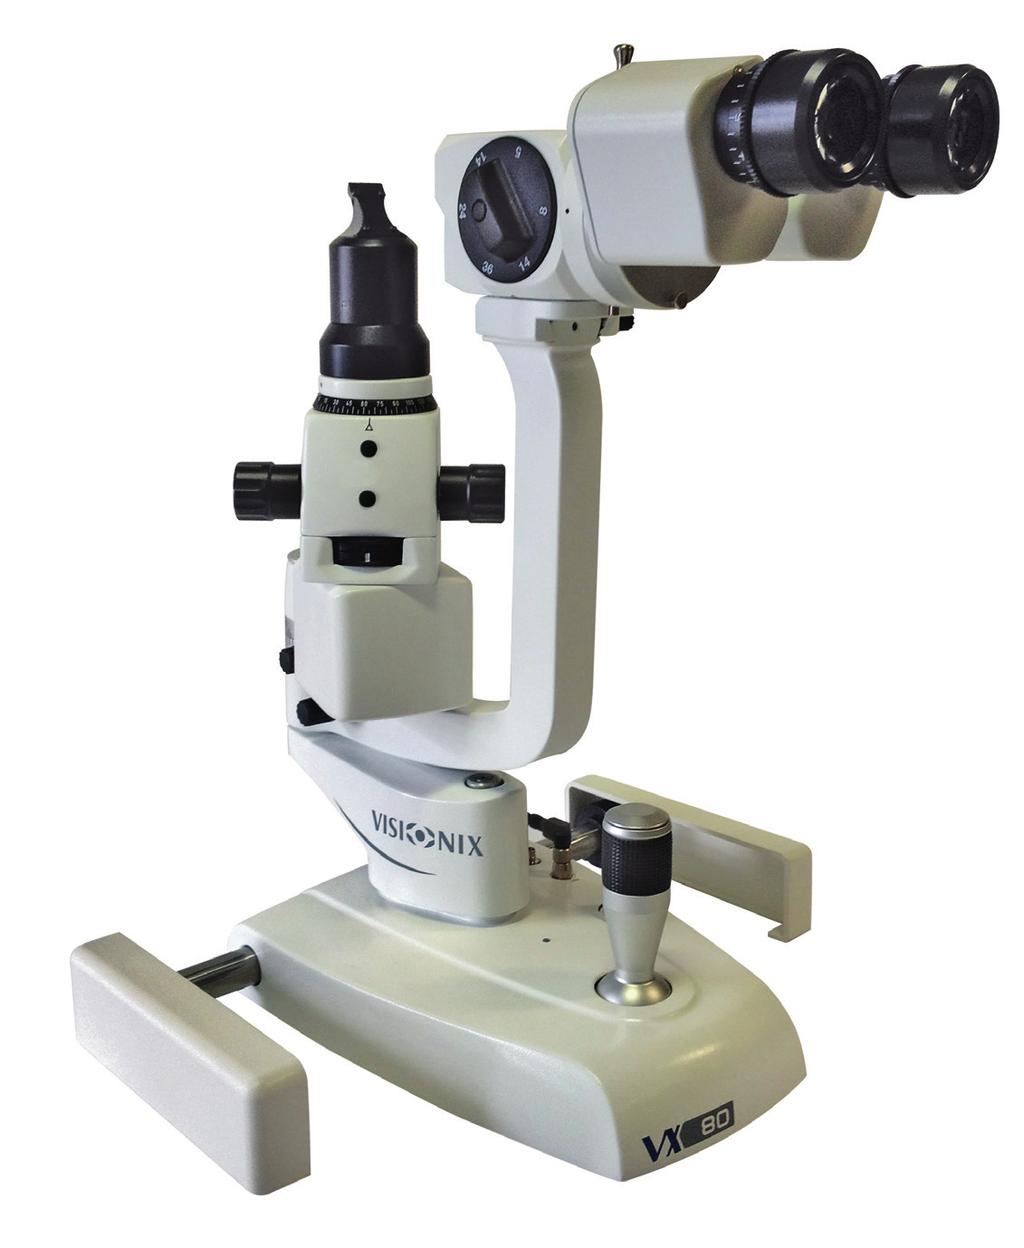 VX80 Compact Slit Lamps Cost effective reliable technology Converging 6-3 magnifications Converging 6-5 magnifications REF. 8480-0001-03 REF.